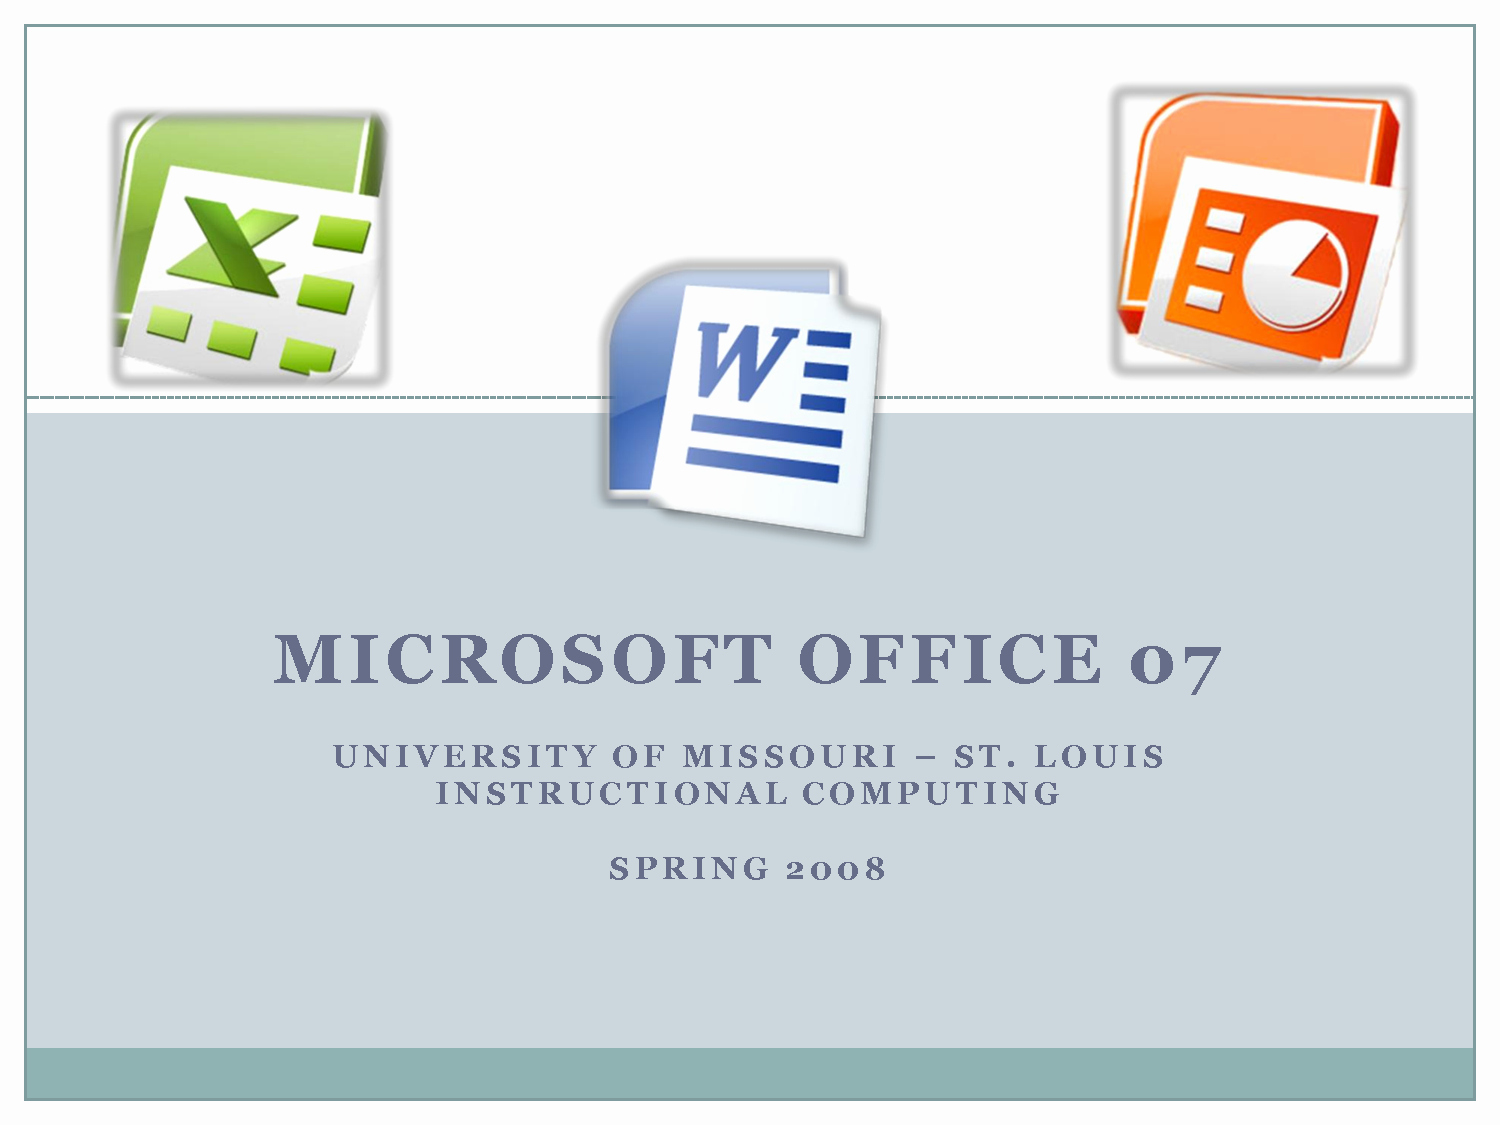 Ms Office Power Point themes Unique Microsoft Fice Powerpoint Templates